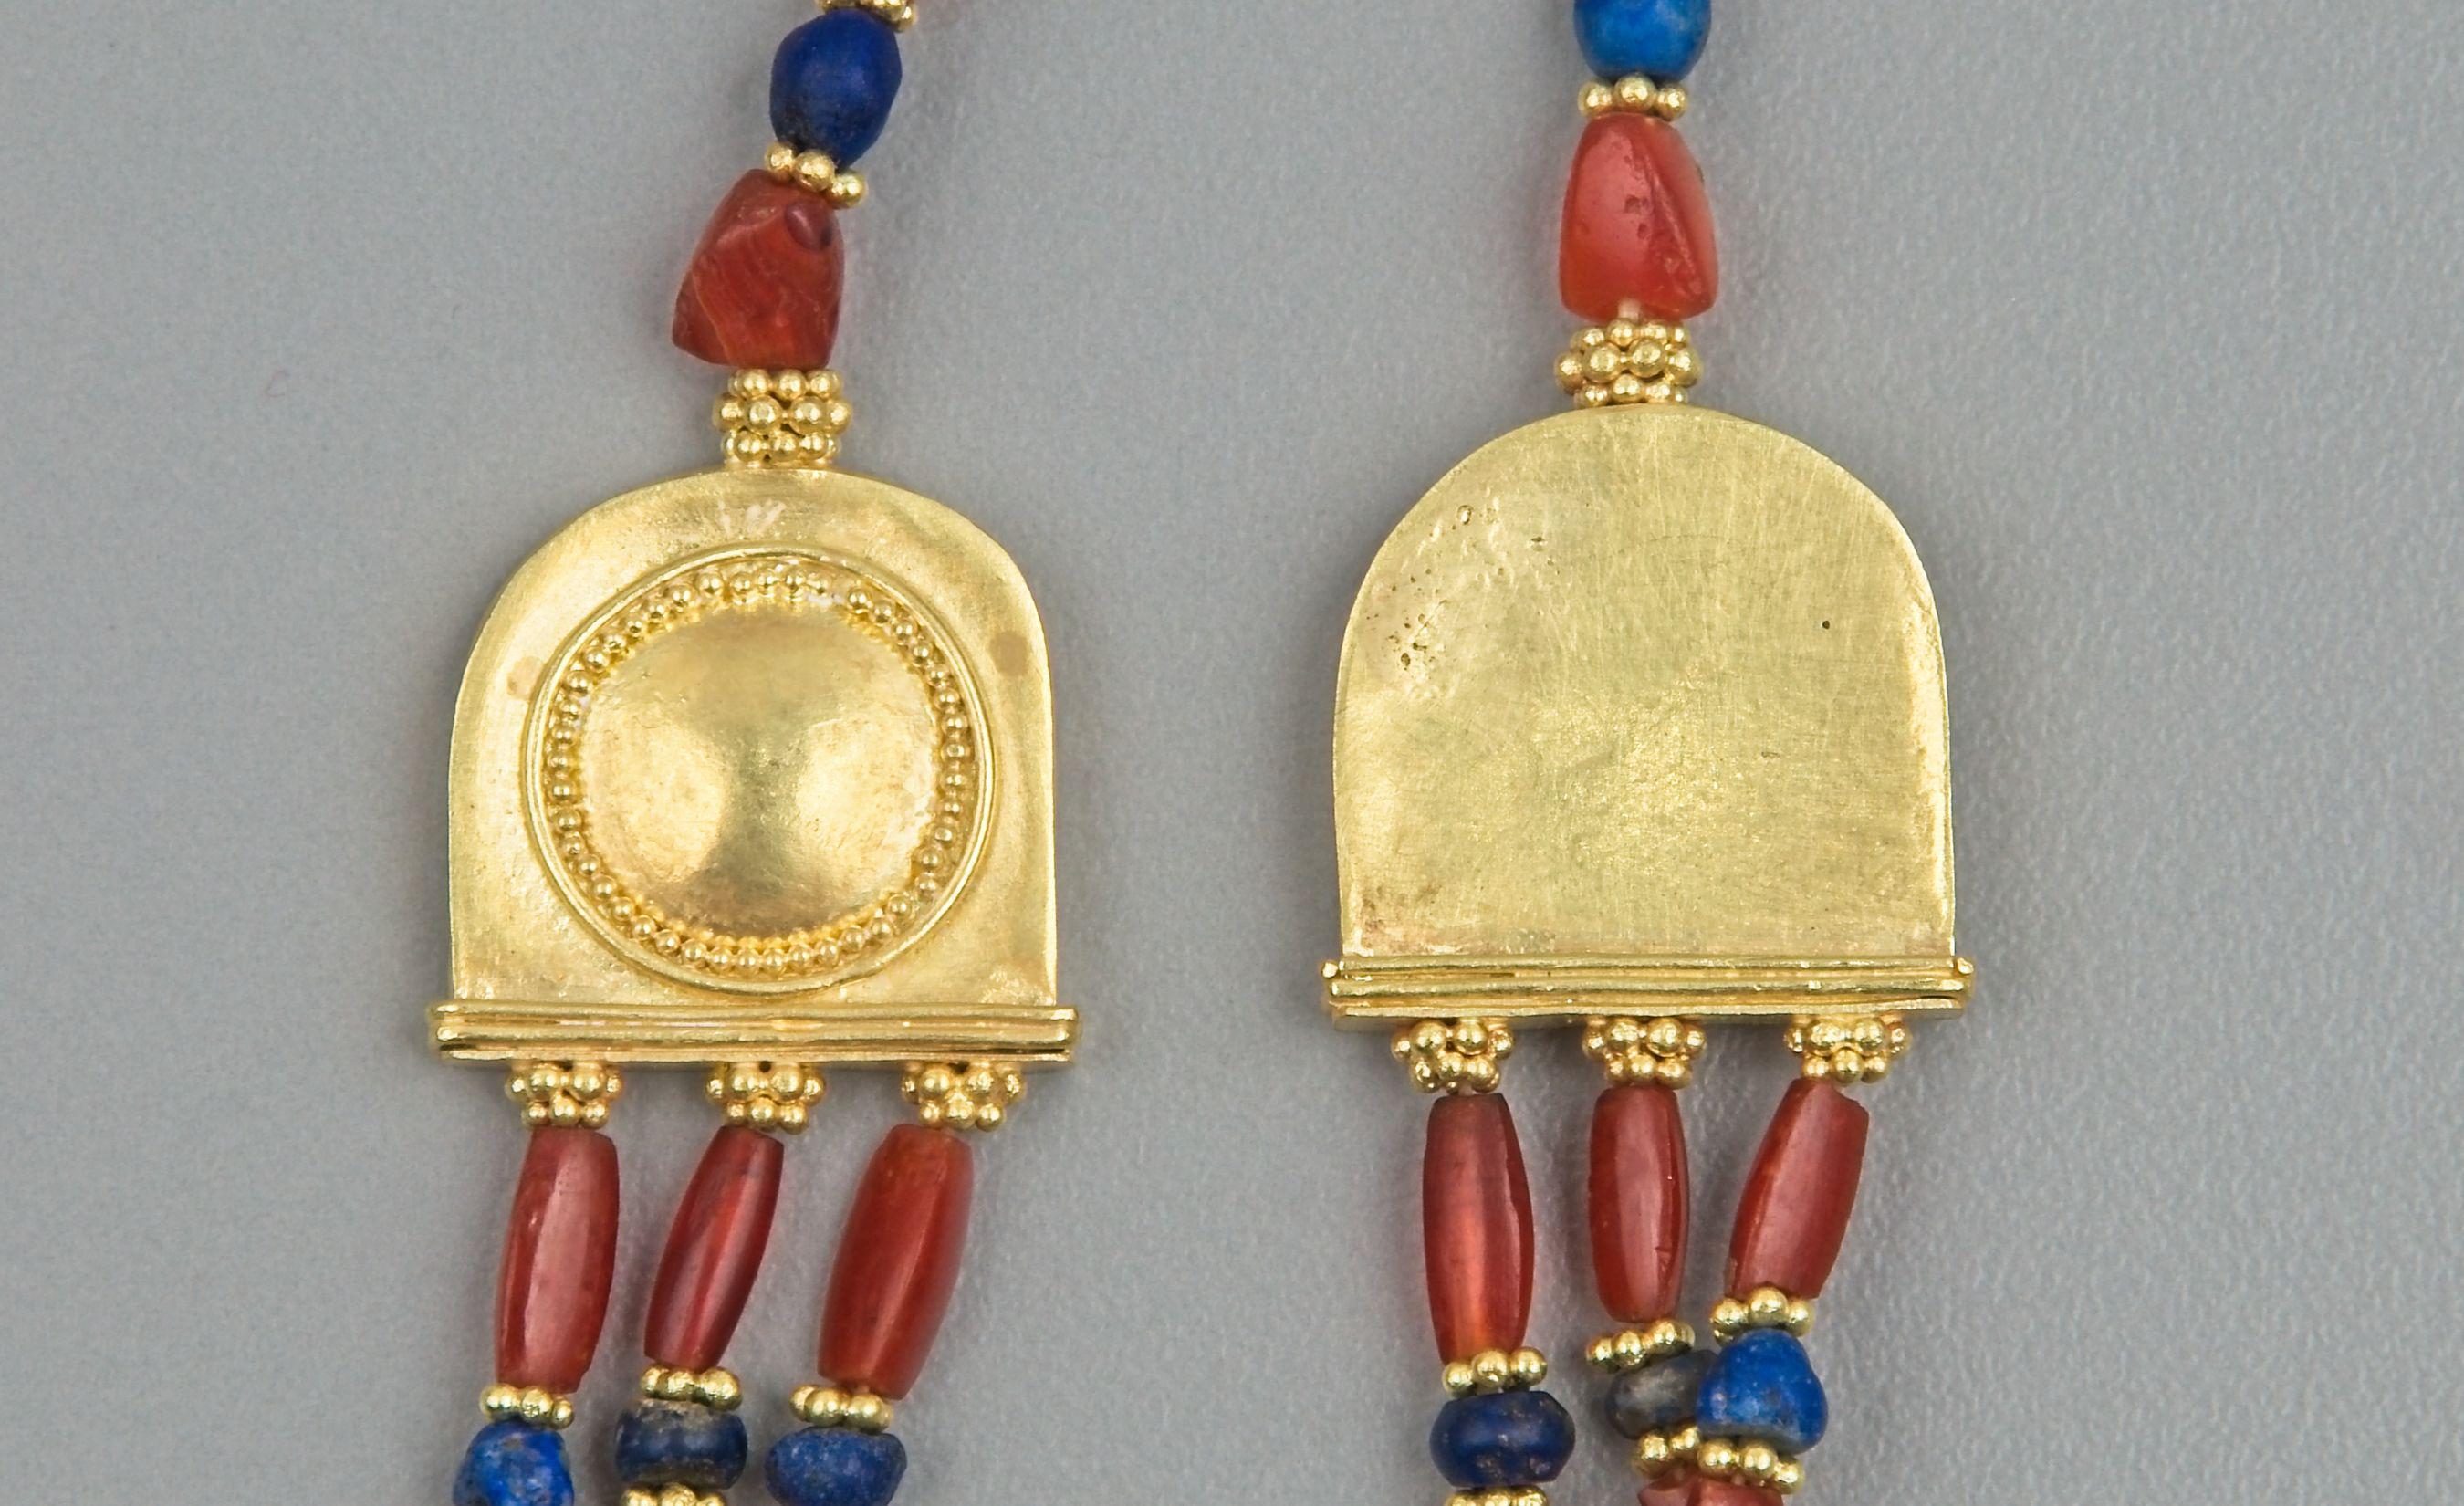 Eighty-six carnelian beads alternating with eighty-three lapis lazuli beads strung in three cascading strands: the stone beads are all alternating with 20k gold granulated ring beads. There are two gold terminals into which the three strands, each 4